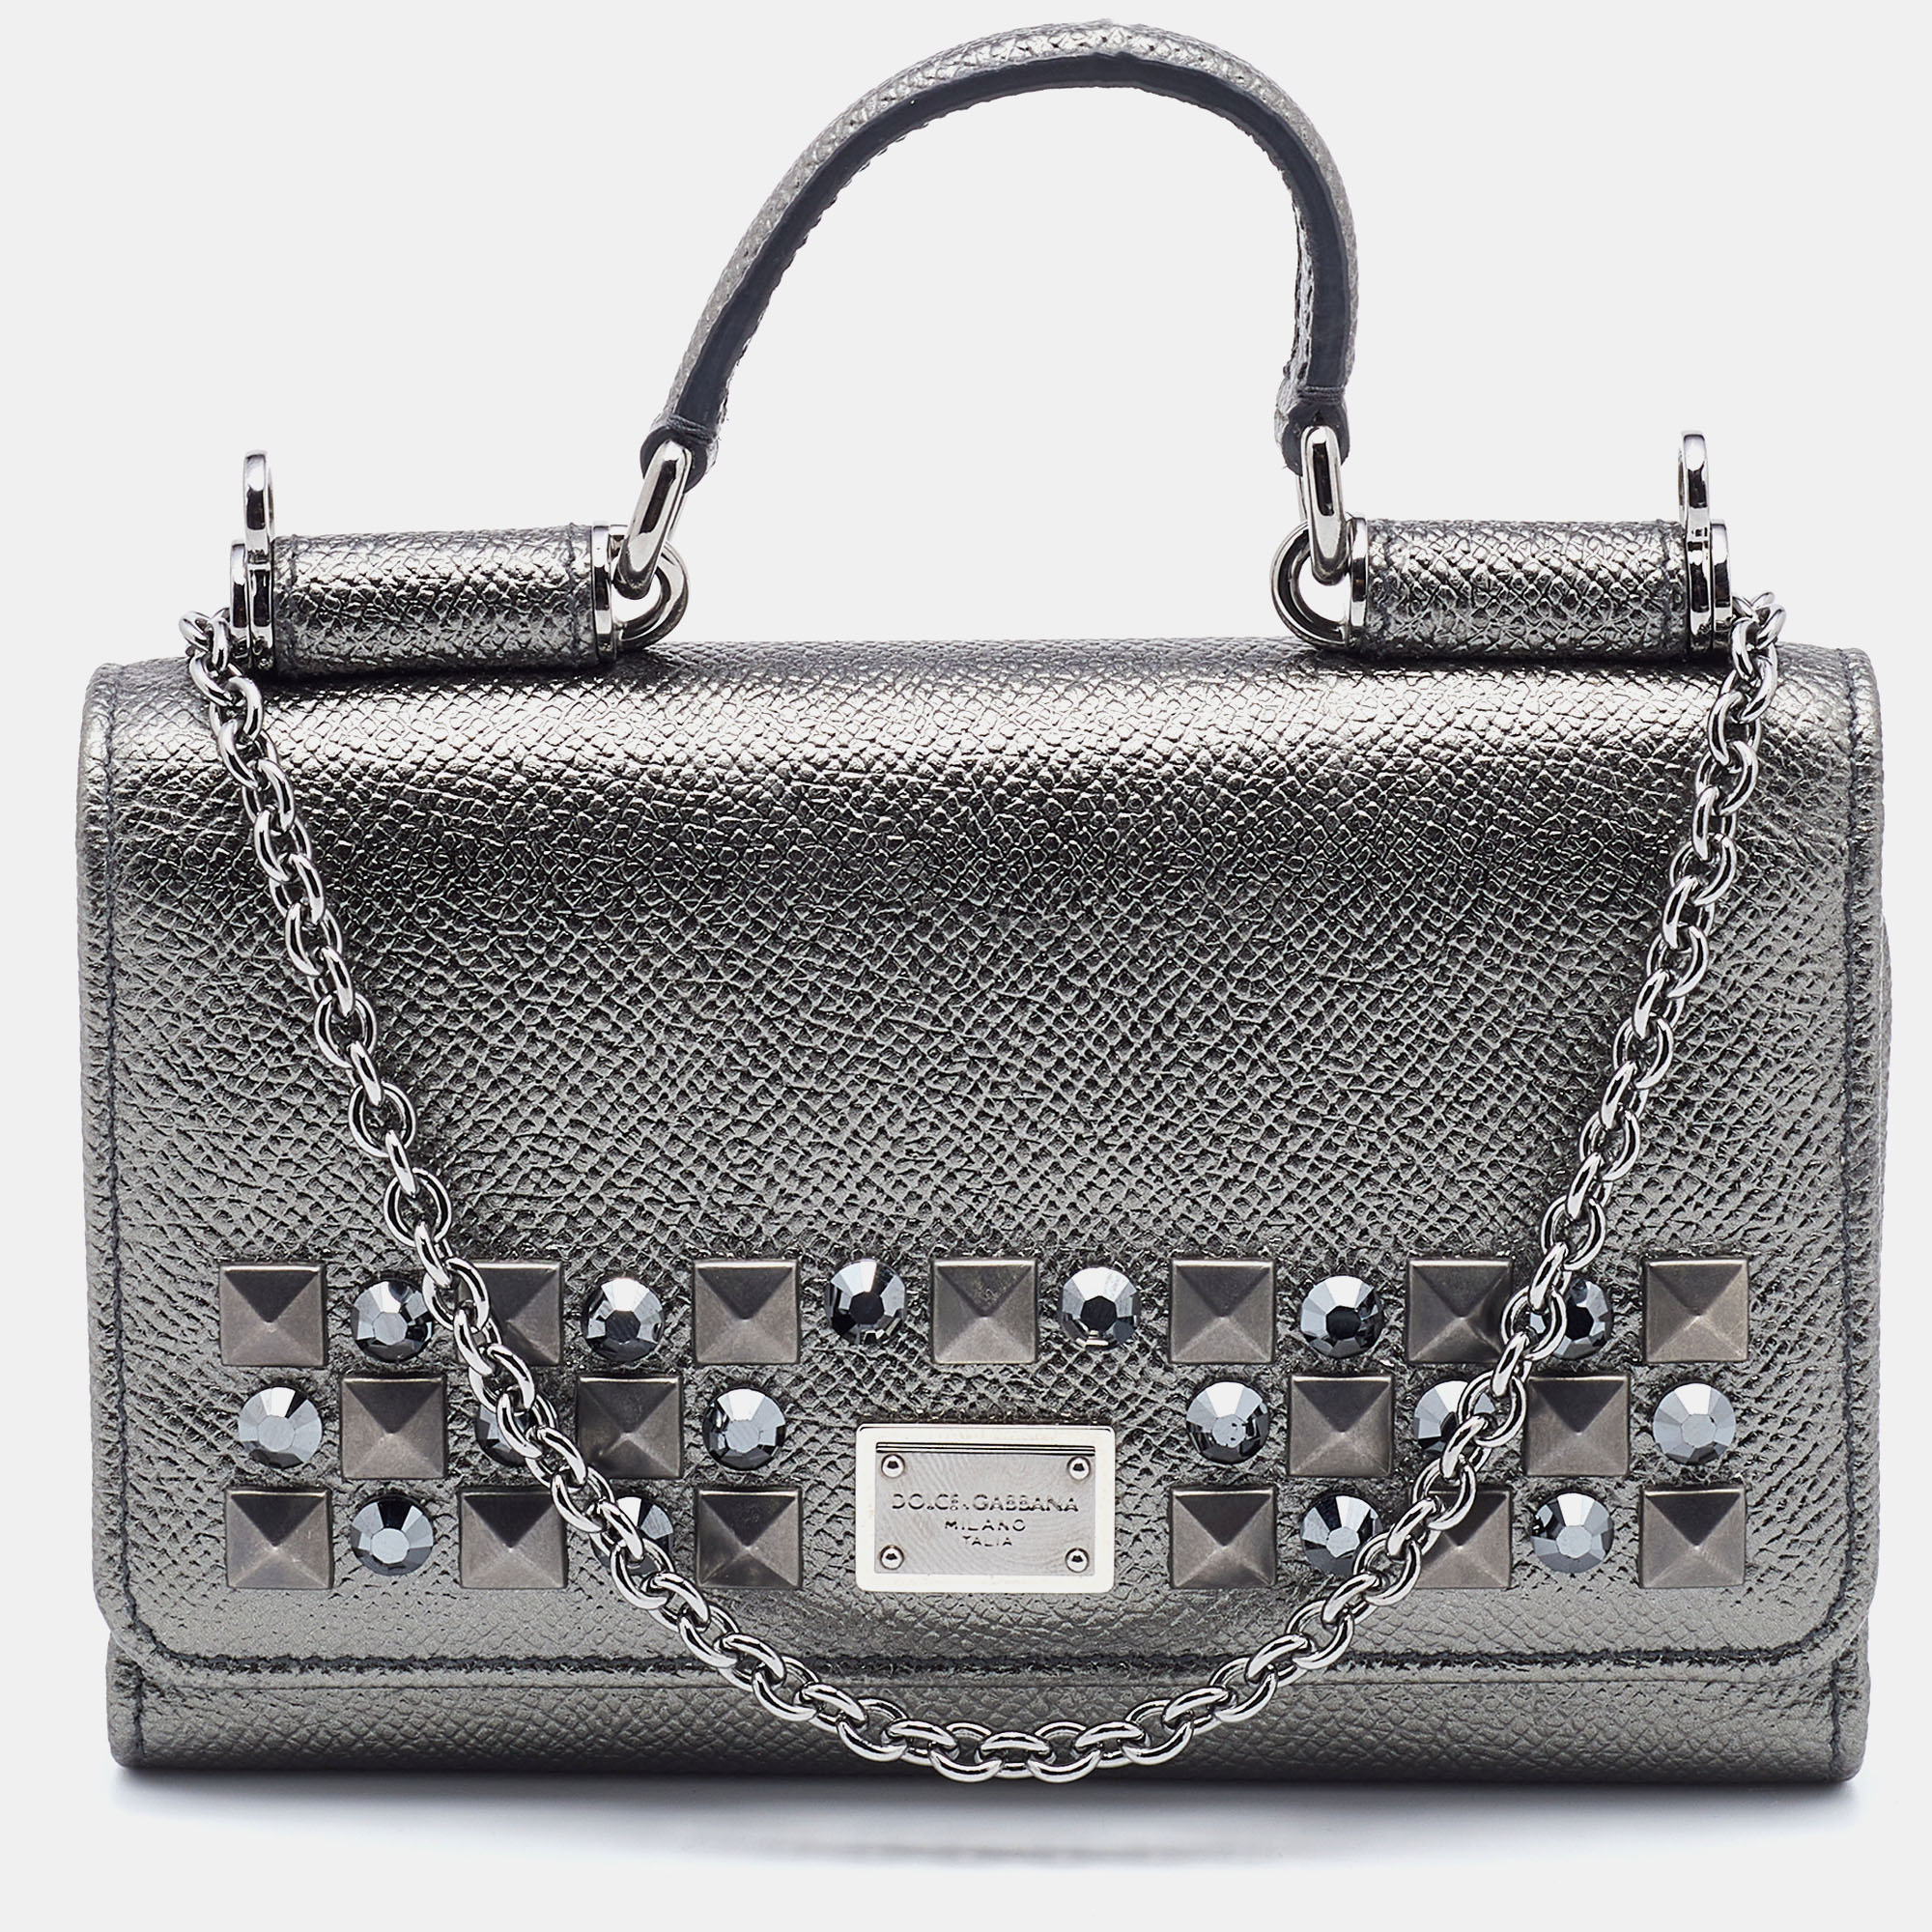 Pre-owned Dolce & Gabbana Metallic Grey Leather Miss Sicily Von Studded Wallet On Chain